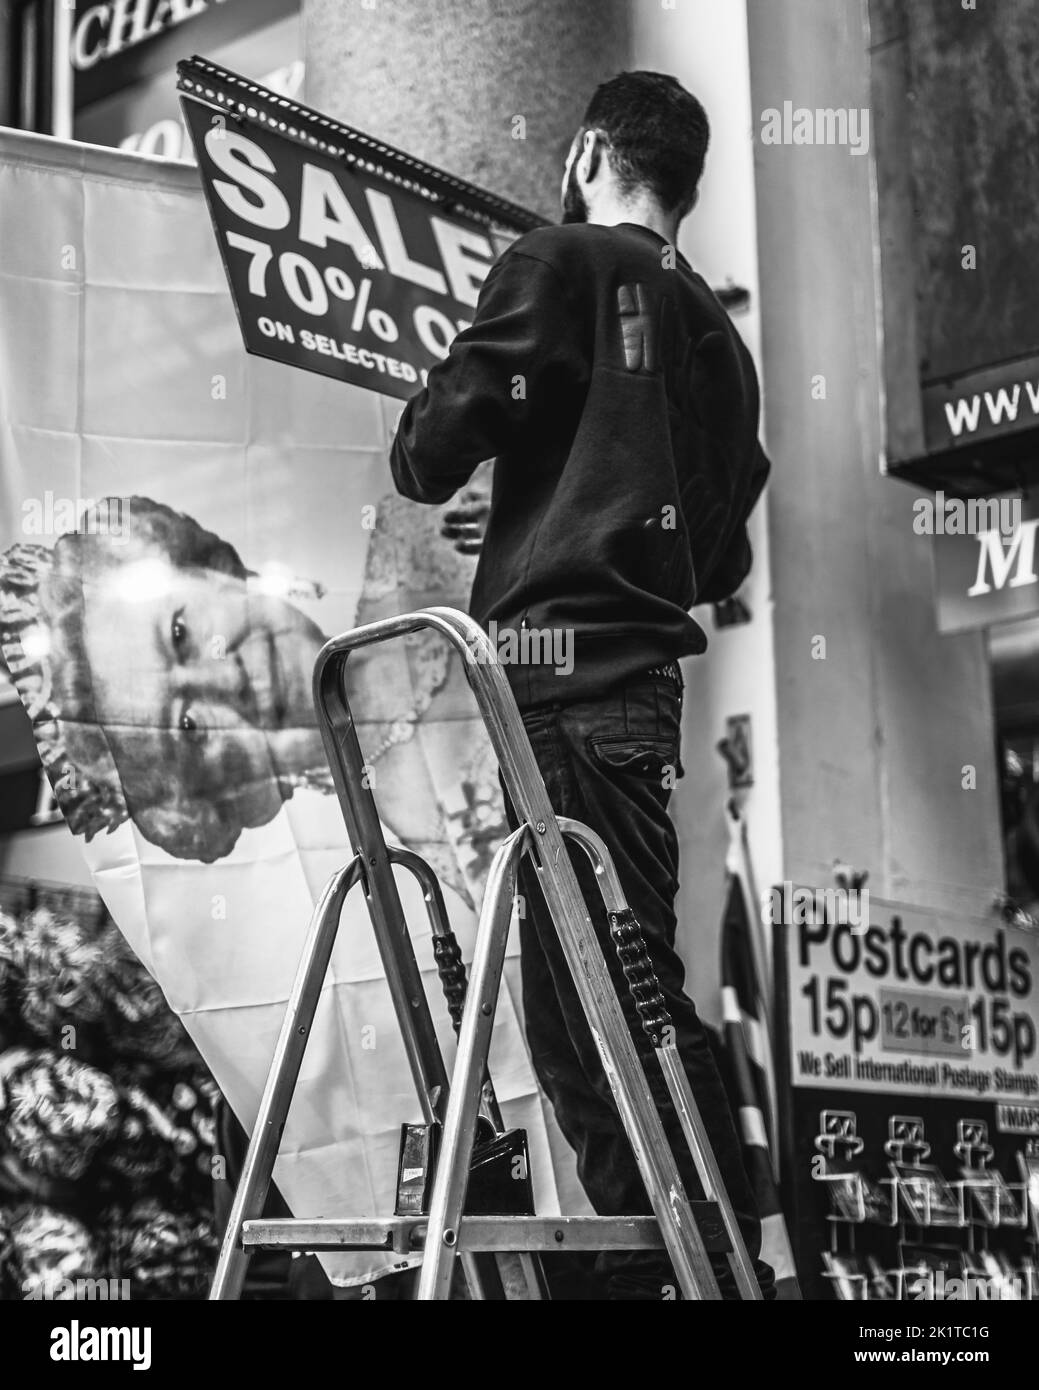 A sales person puts up a 70% discount sign on the Queen memorabilia in a store in central London. Stock Photo